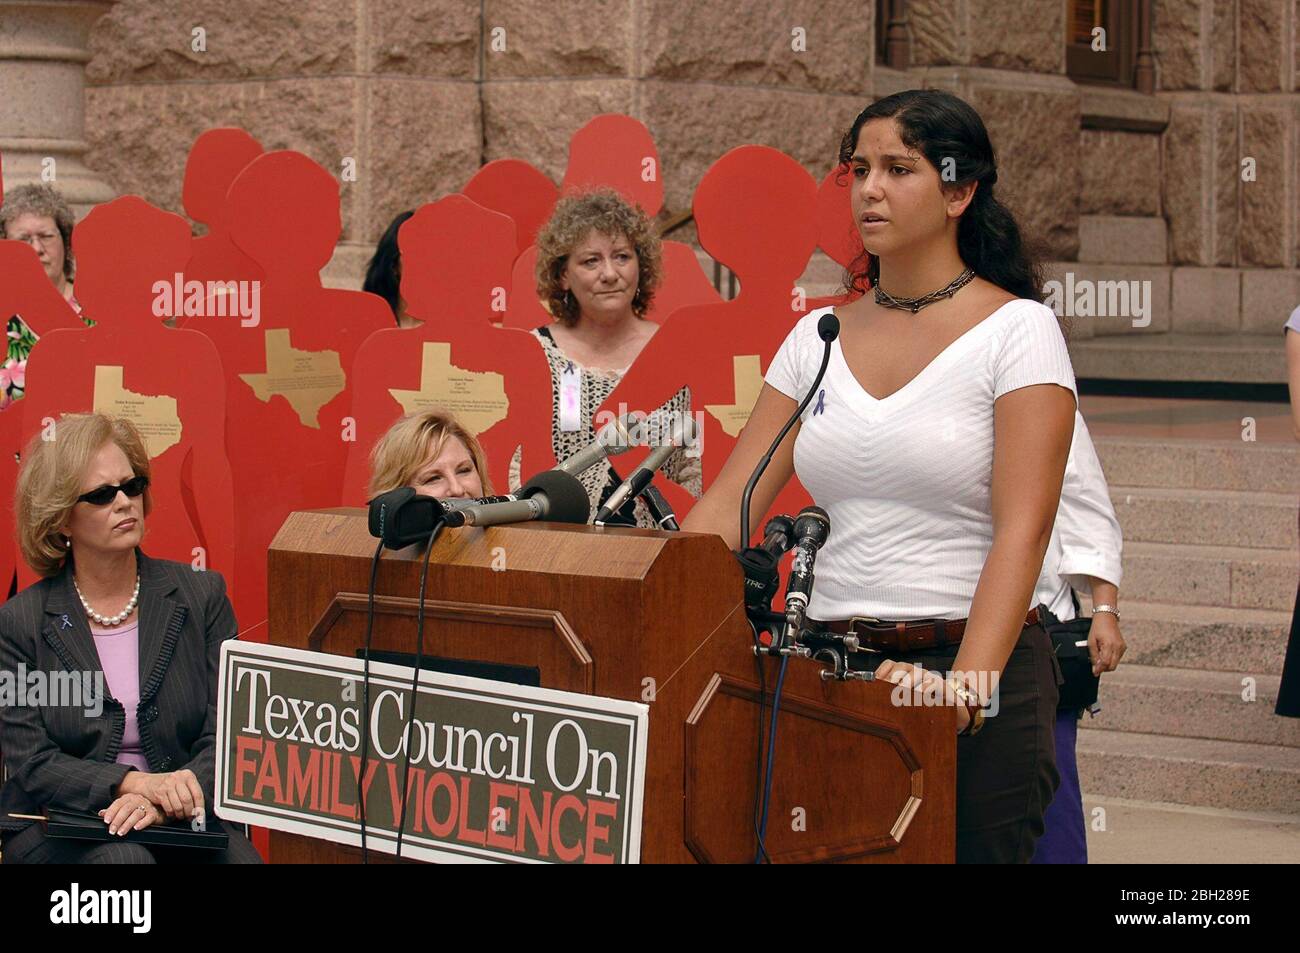 Austin, Texas USA, October 4, 2005: Texans rally at the State Capitol to remember the 115 women killed in 2004 by their intimate partners as part of the Texas Council on Family Violence's 'Silent Witness' campaign. Survivor Angela Catalina De Hoyos speaks. ©Bob Daemmrich Stock Photo